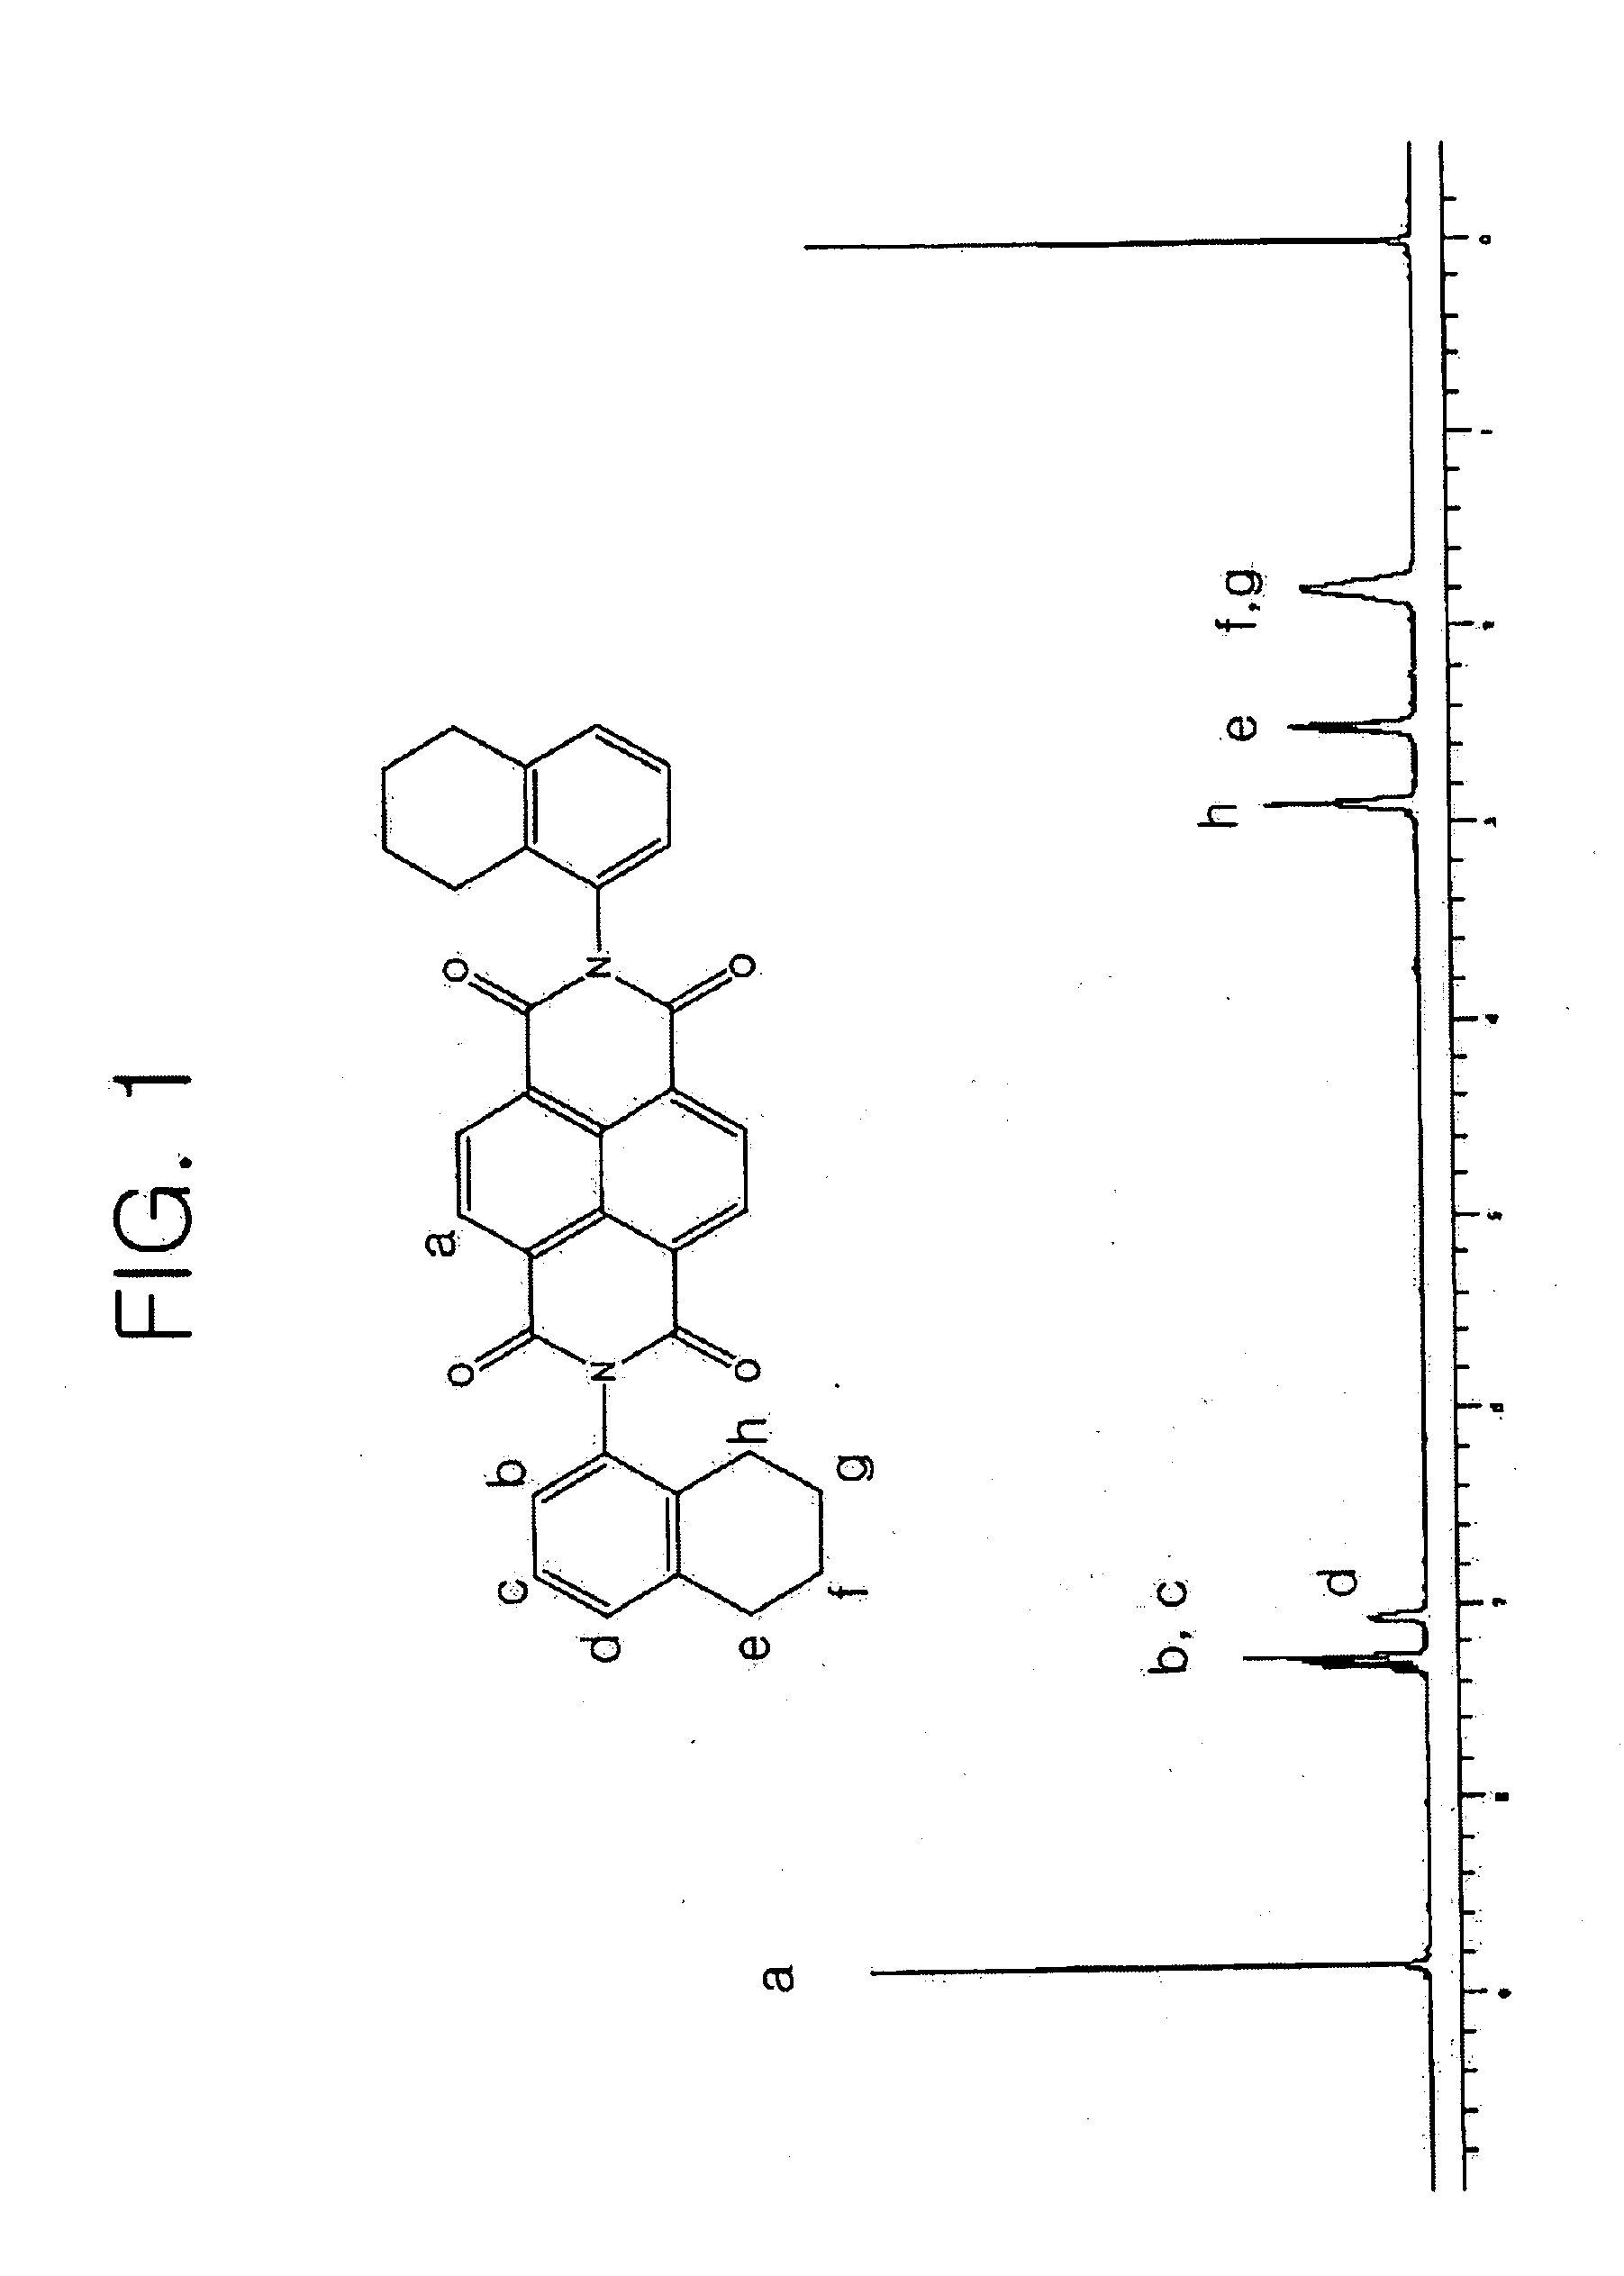 Naphthalenetetracarboxylic acid diimide derivatives and electrophotographic photoconductive material having the same